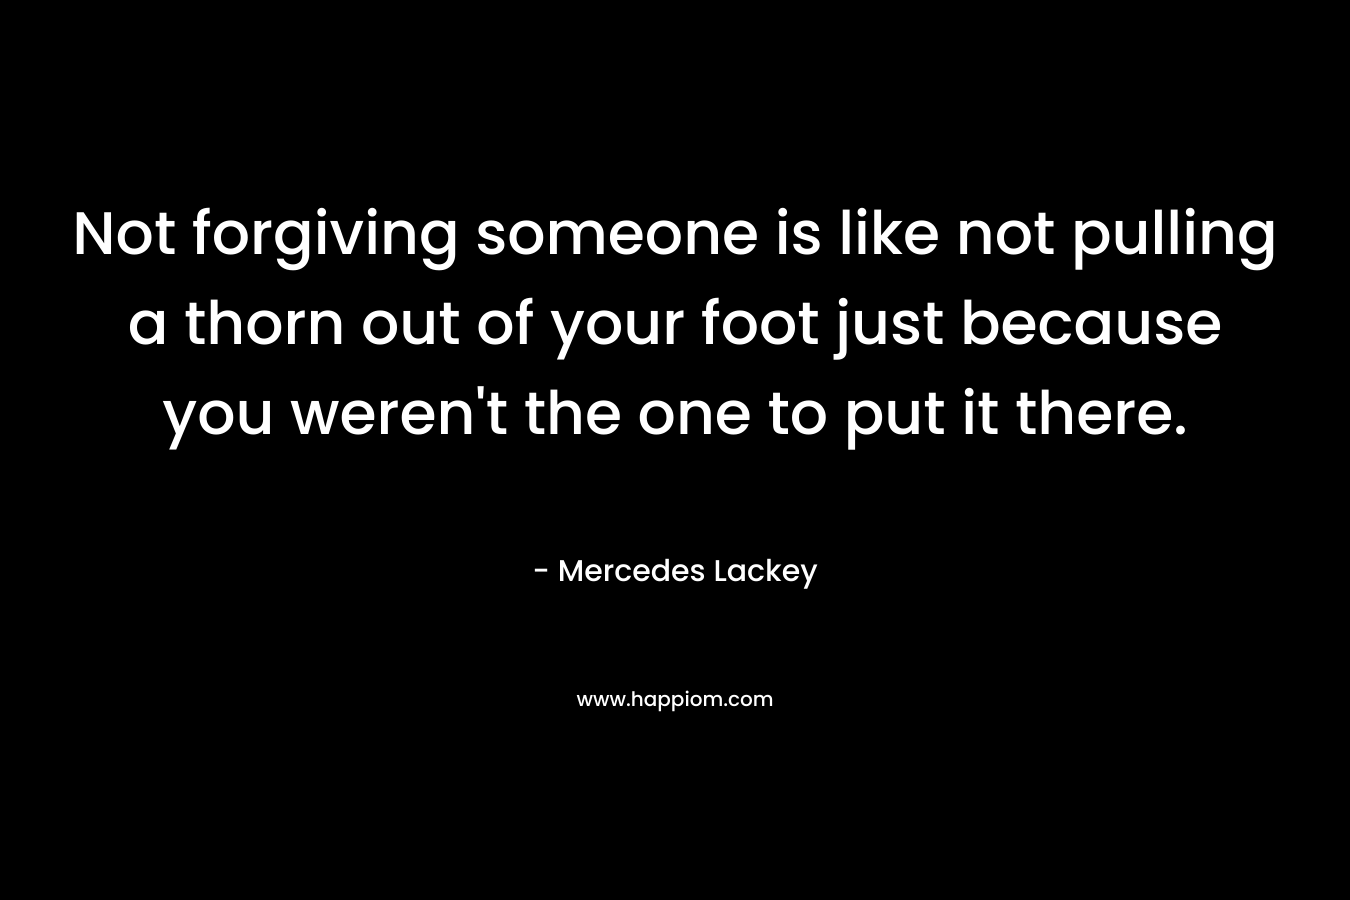 Not forgiving someone is like not pulling a thorn out of your foot just because you weren’t the one to put it there. – Mercedes Lackey